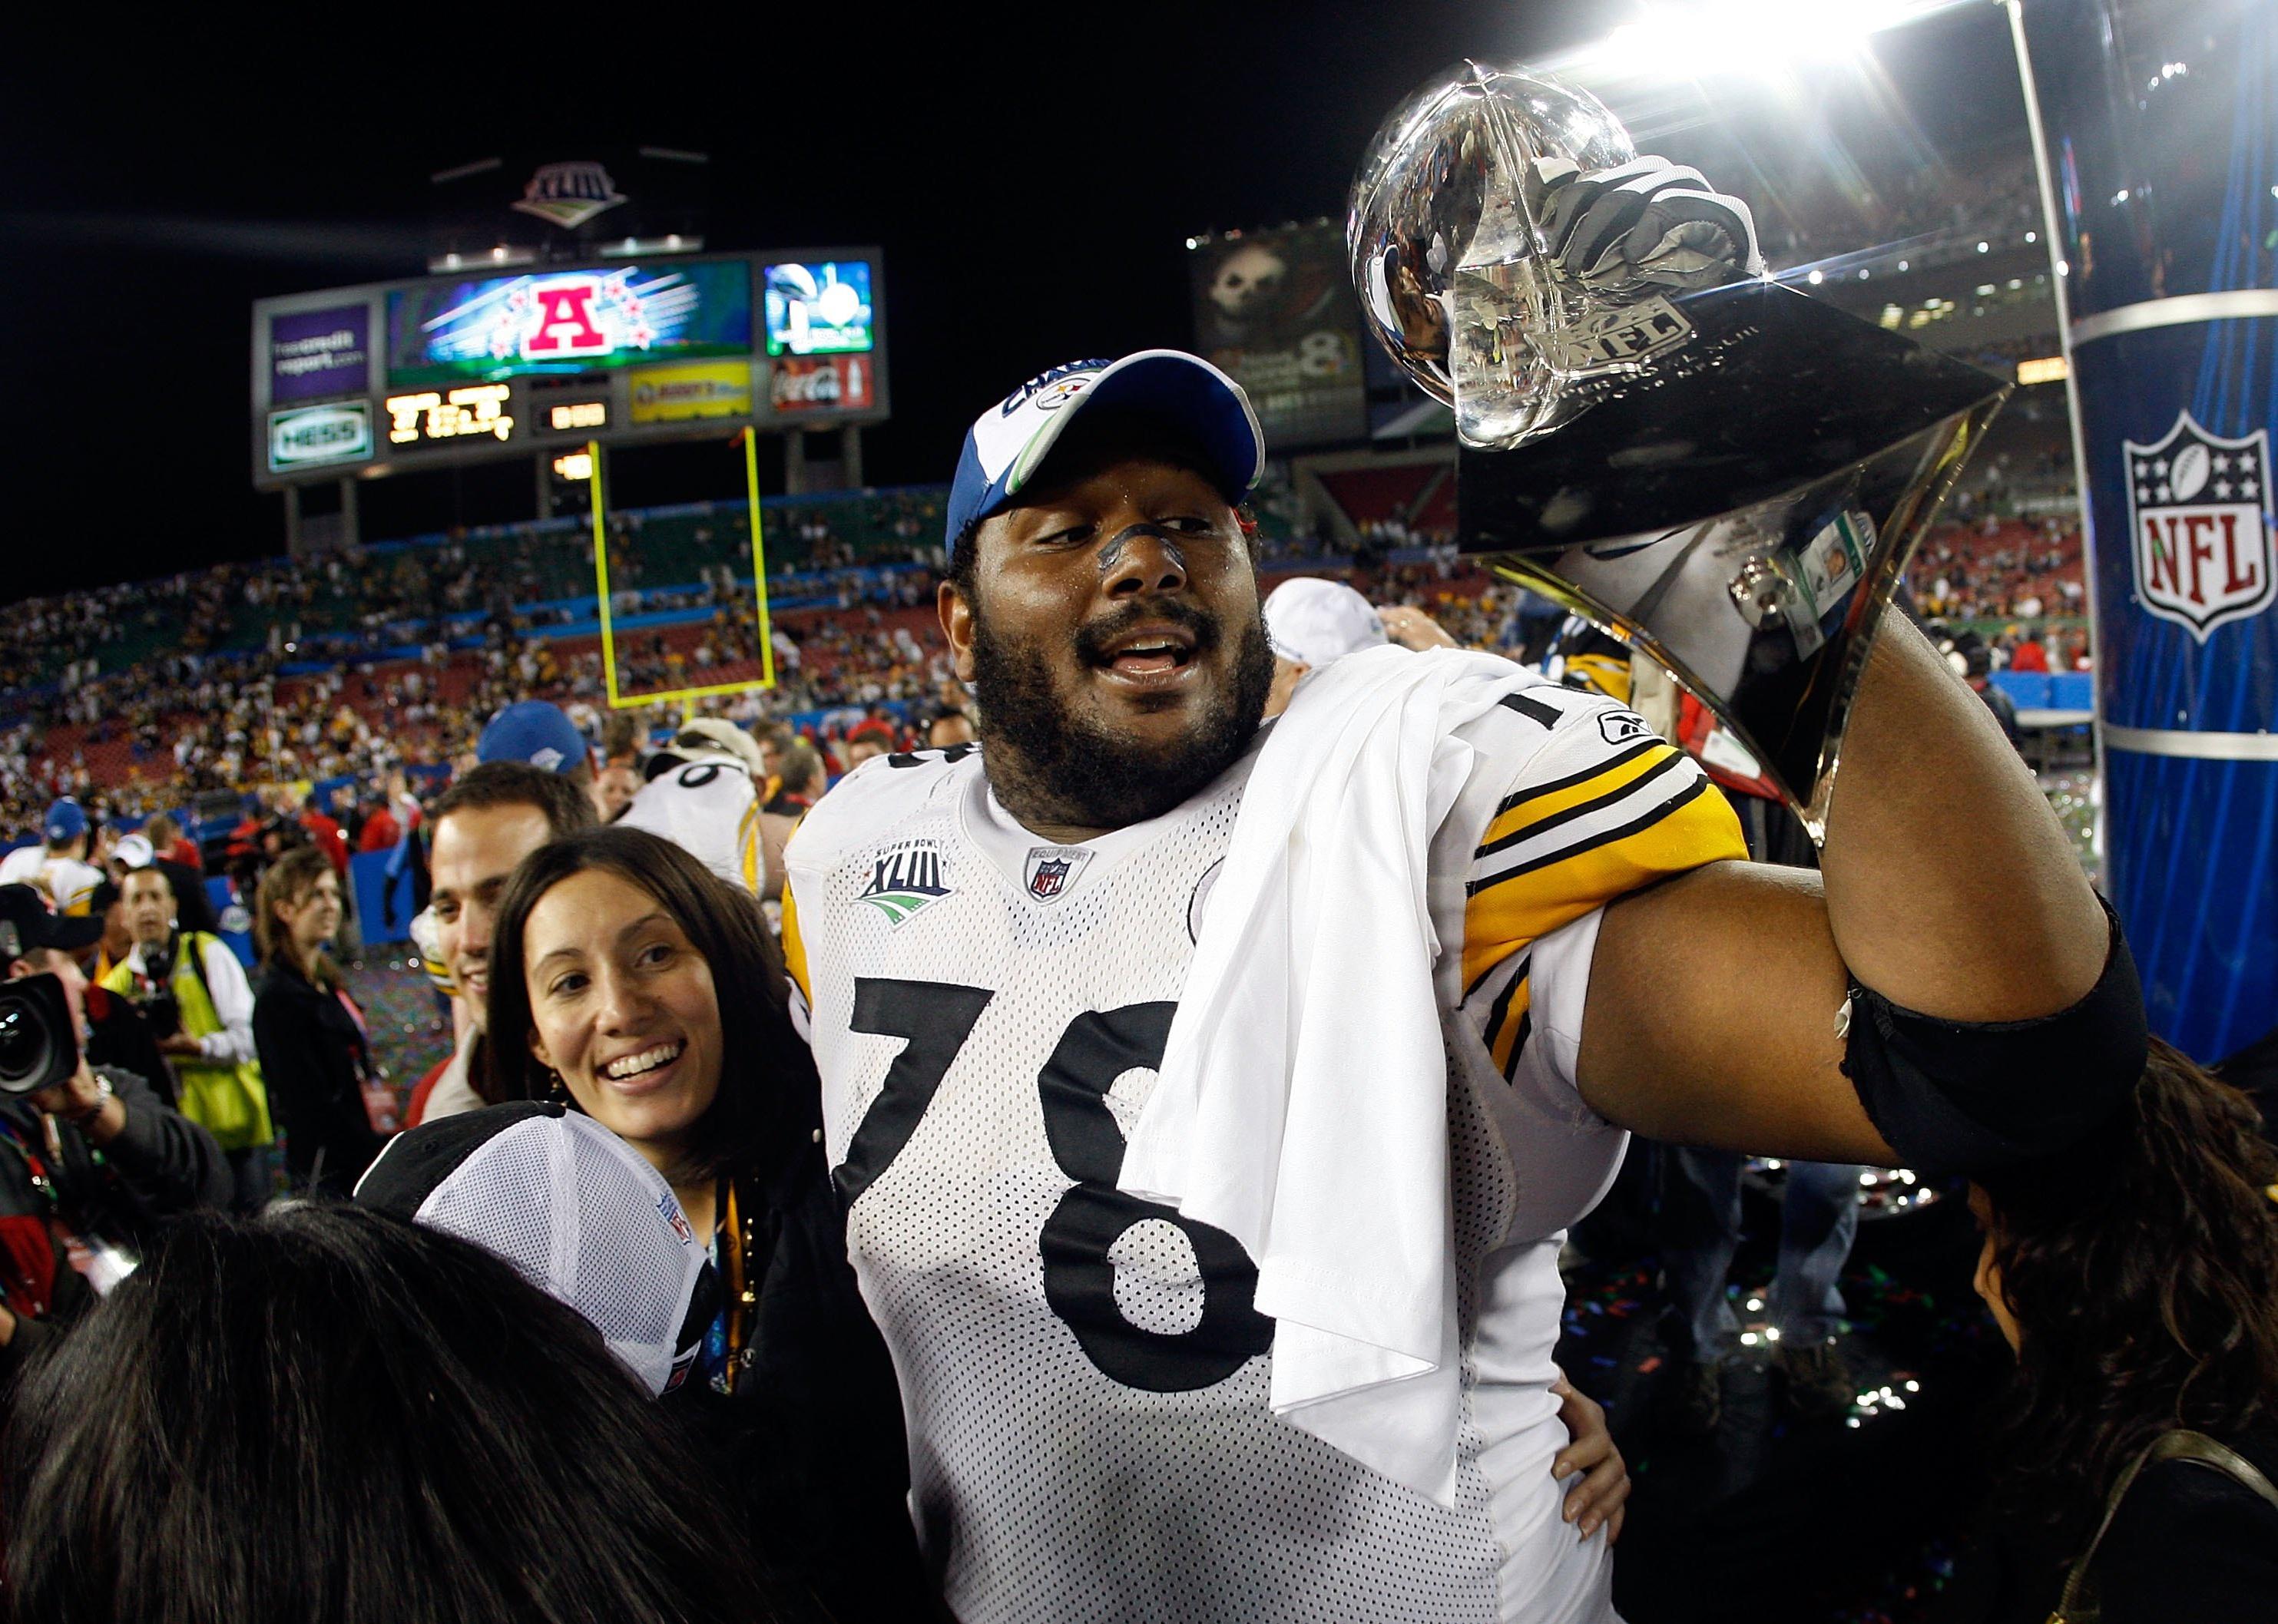 Max Starks of the Pittsburgh Steelers holds up the Vince Lombardi Trophy.